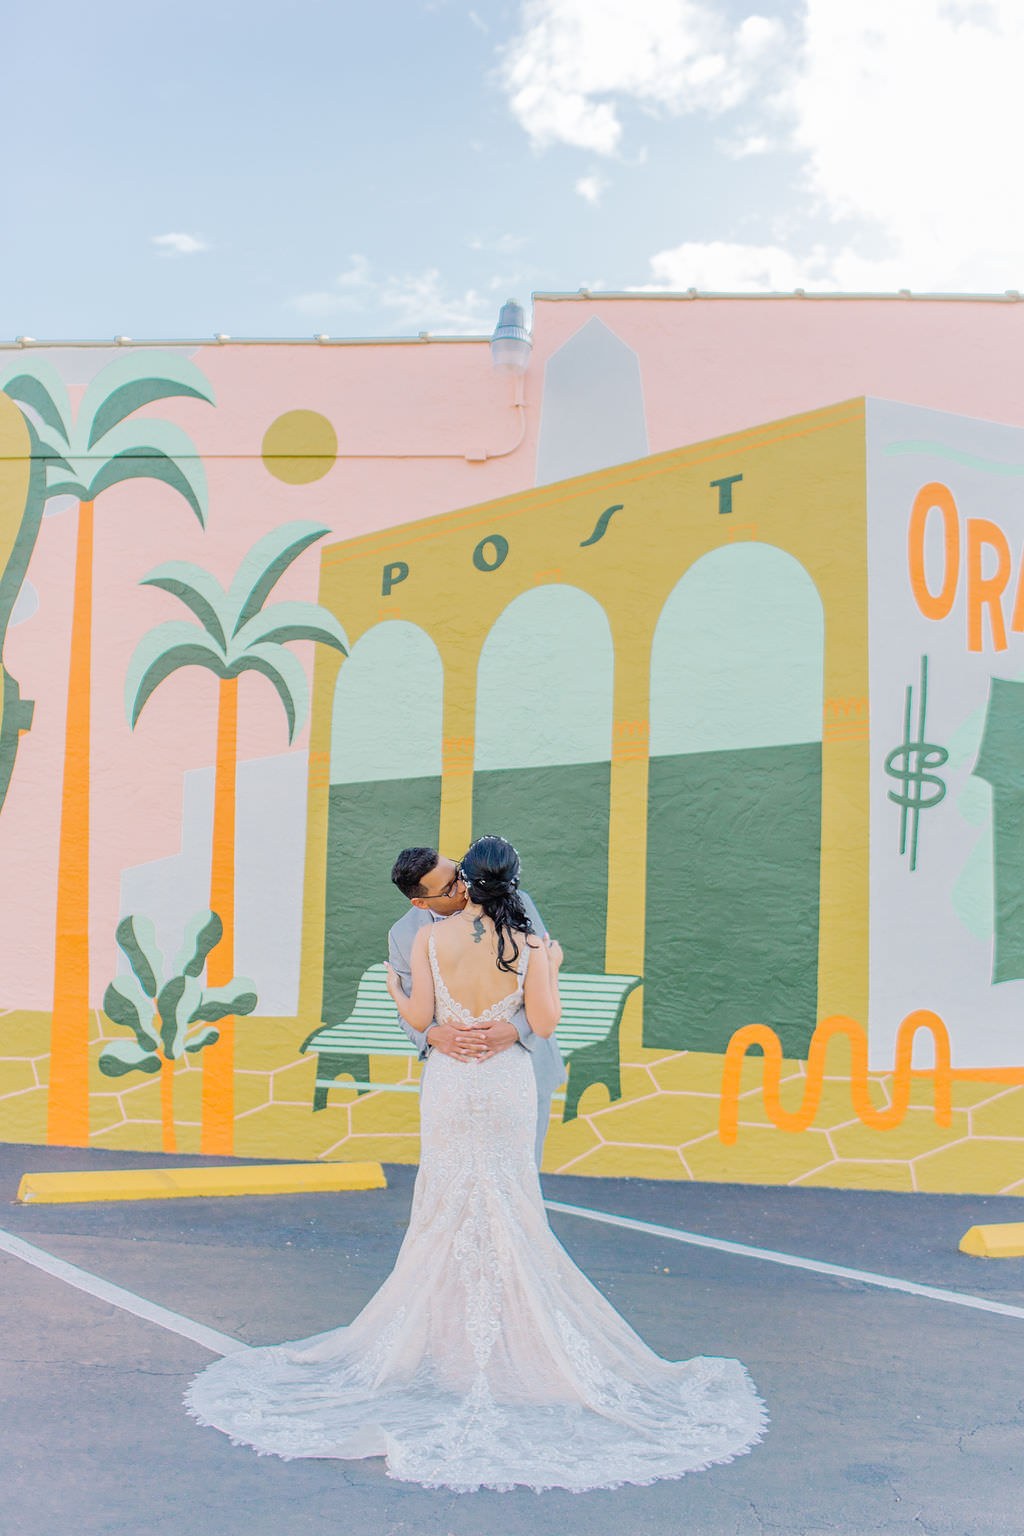 St. Pete wedding portraits in front of mural